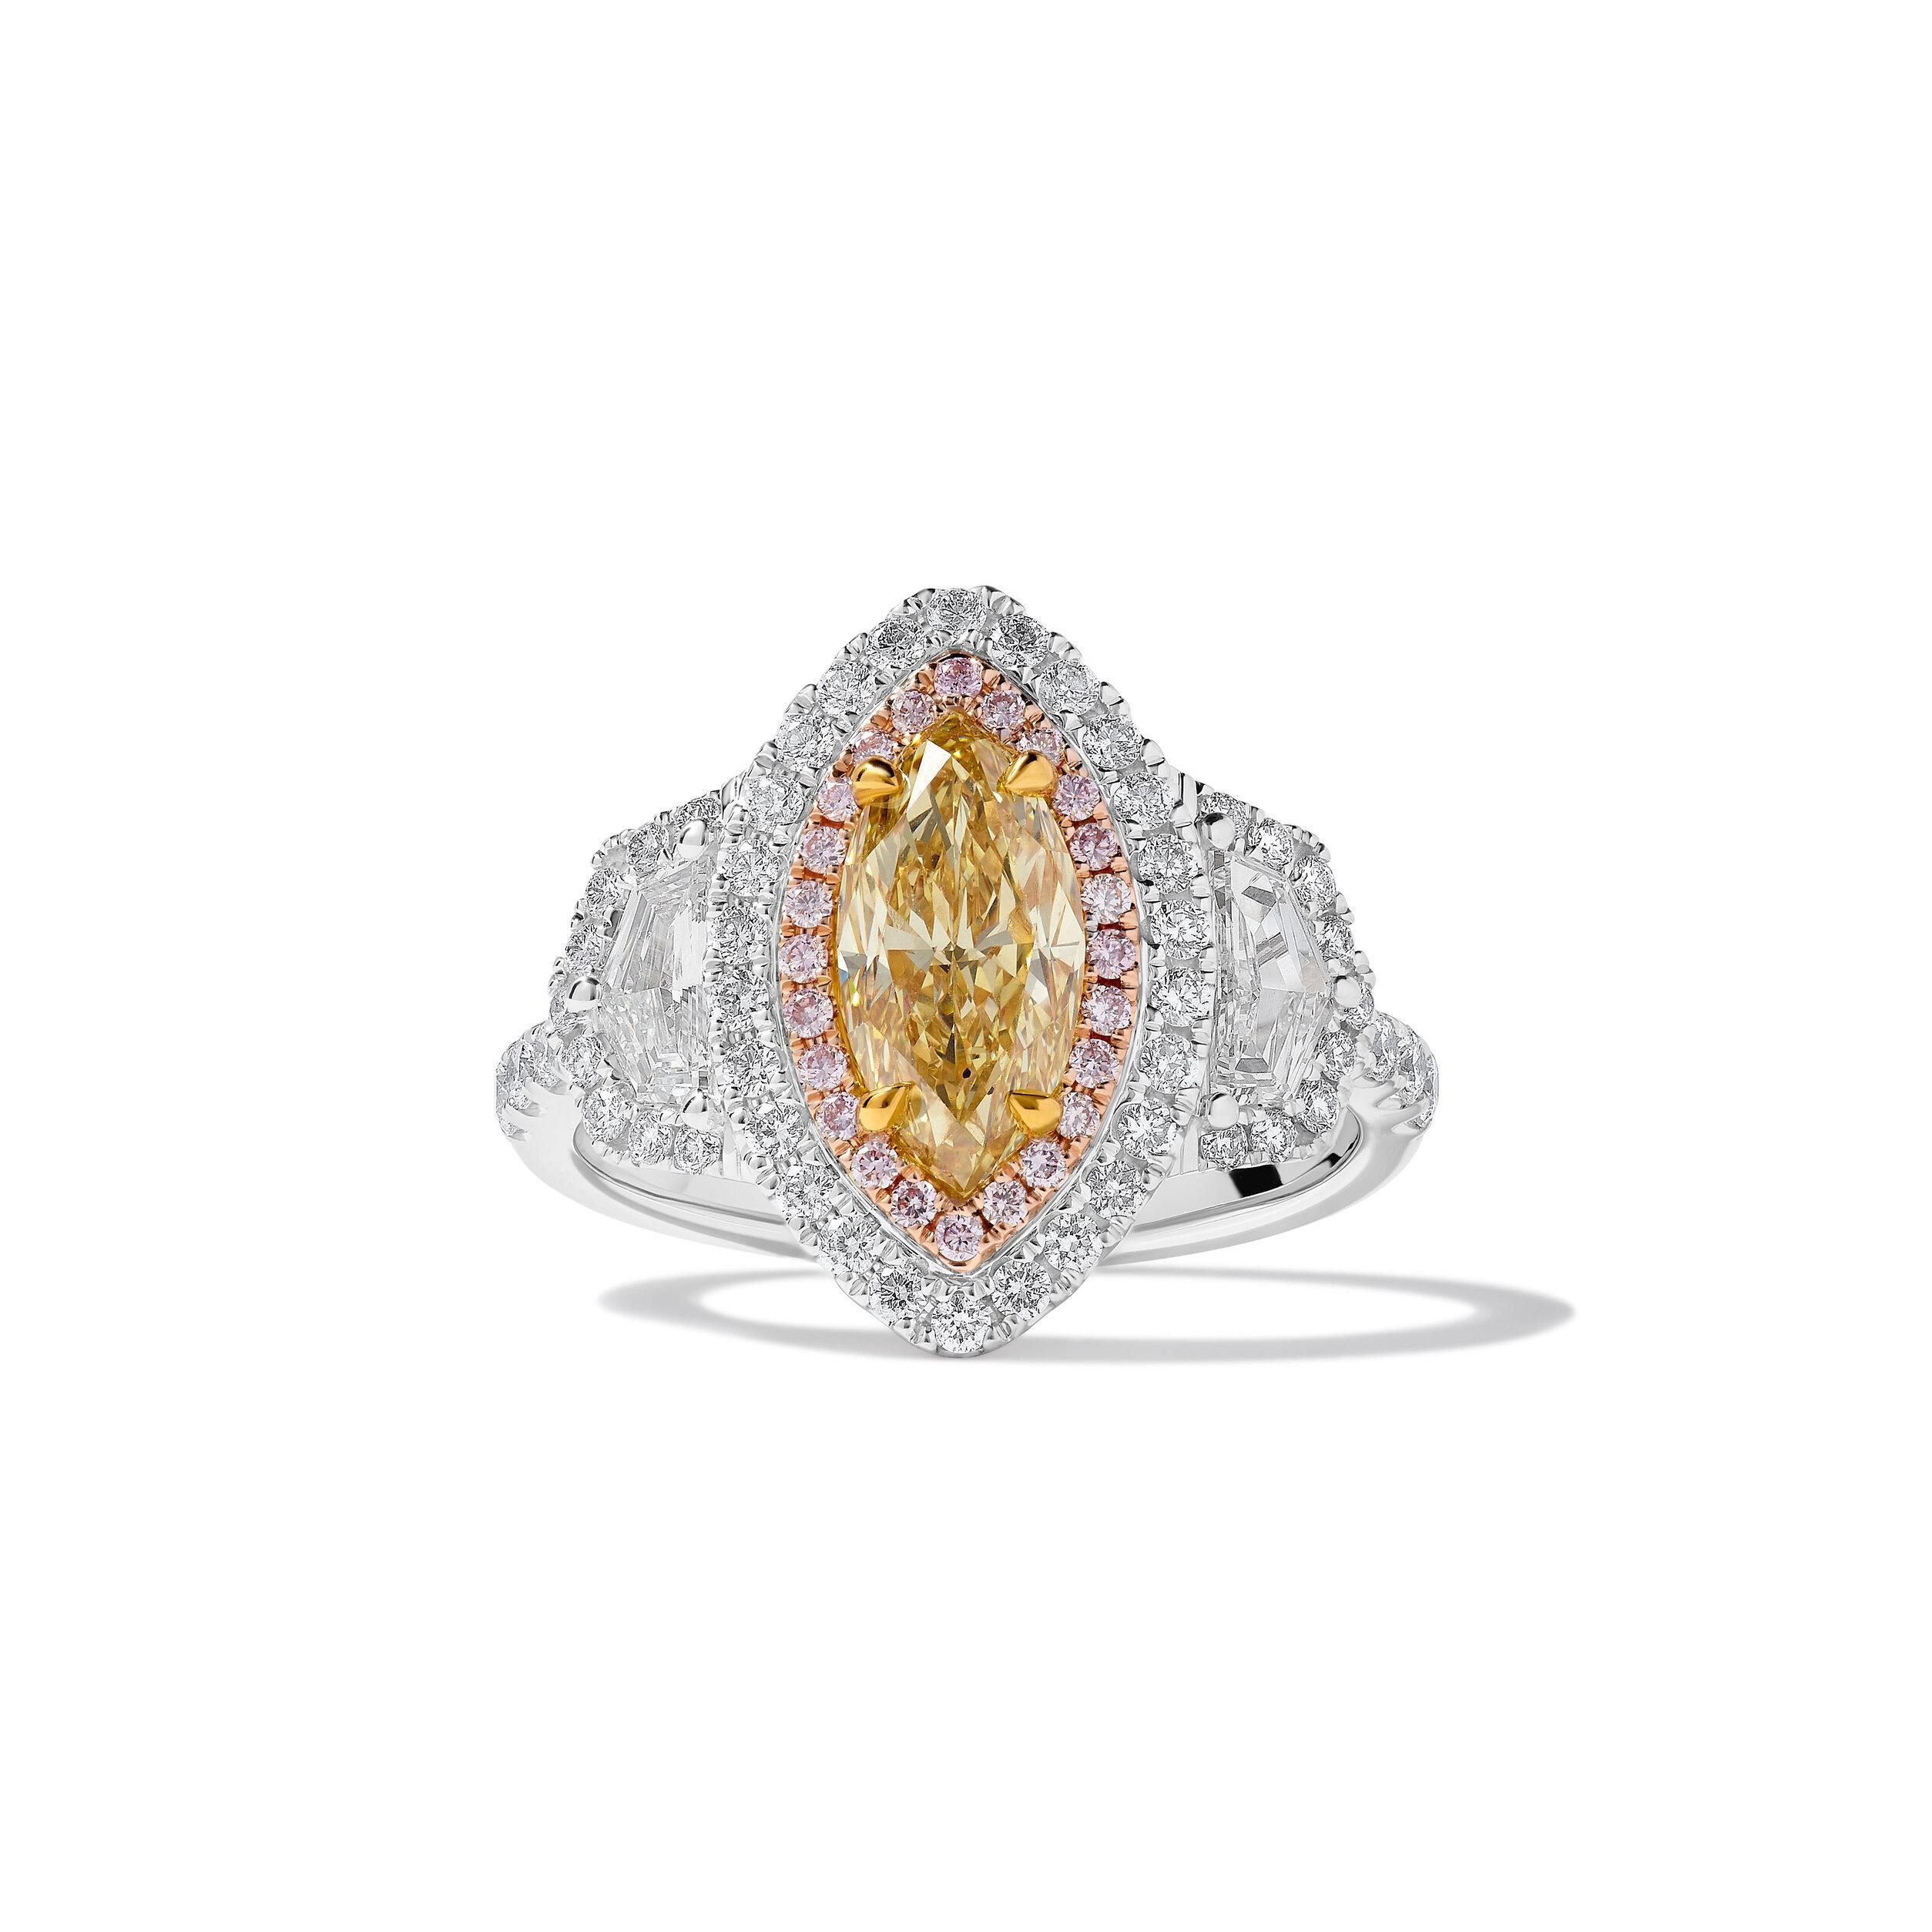 RareGemWorld's classic GIA certified diamond ring. Mounted in a beautiful 18K Rose and White Gold setting with a natural marquise cut yellow diamond. The yellow diamond is surrounded by two GIA certified natural epaulette cut white diamonds, round